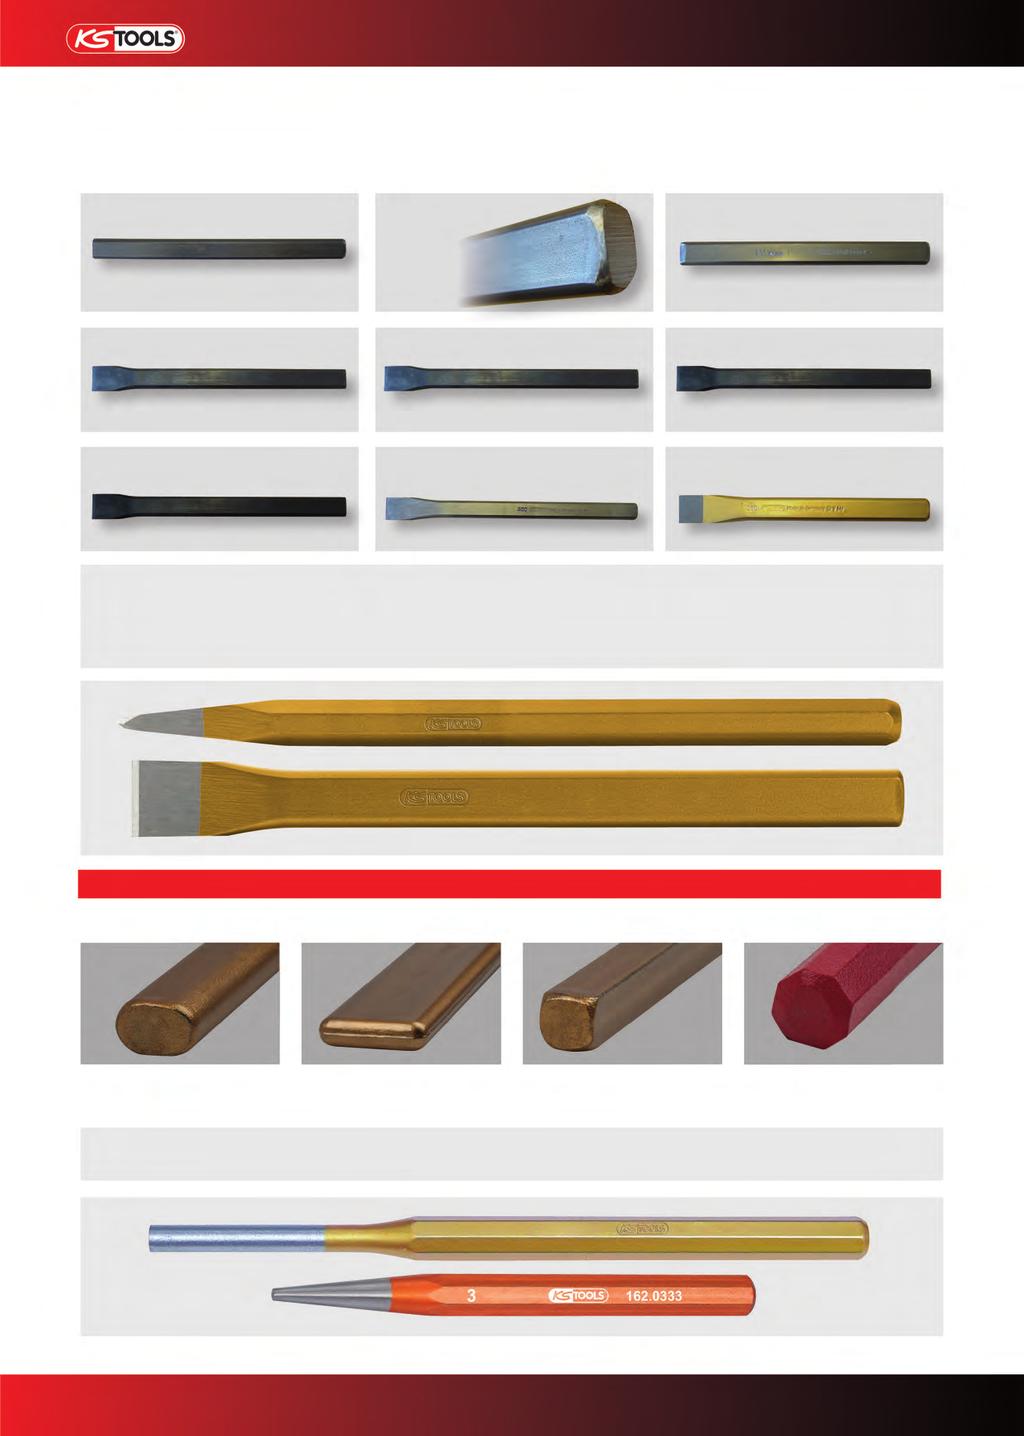 STRIKING TOOLS Manufacturing and fabrication steps Section Impact head grinding Embossing Forging Hardening Head tempering Tempering Sand blasting Powder baking and lacquering Our chisels are forged